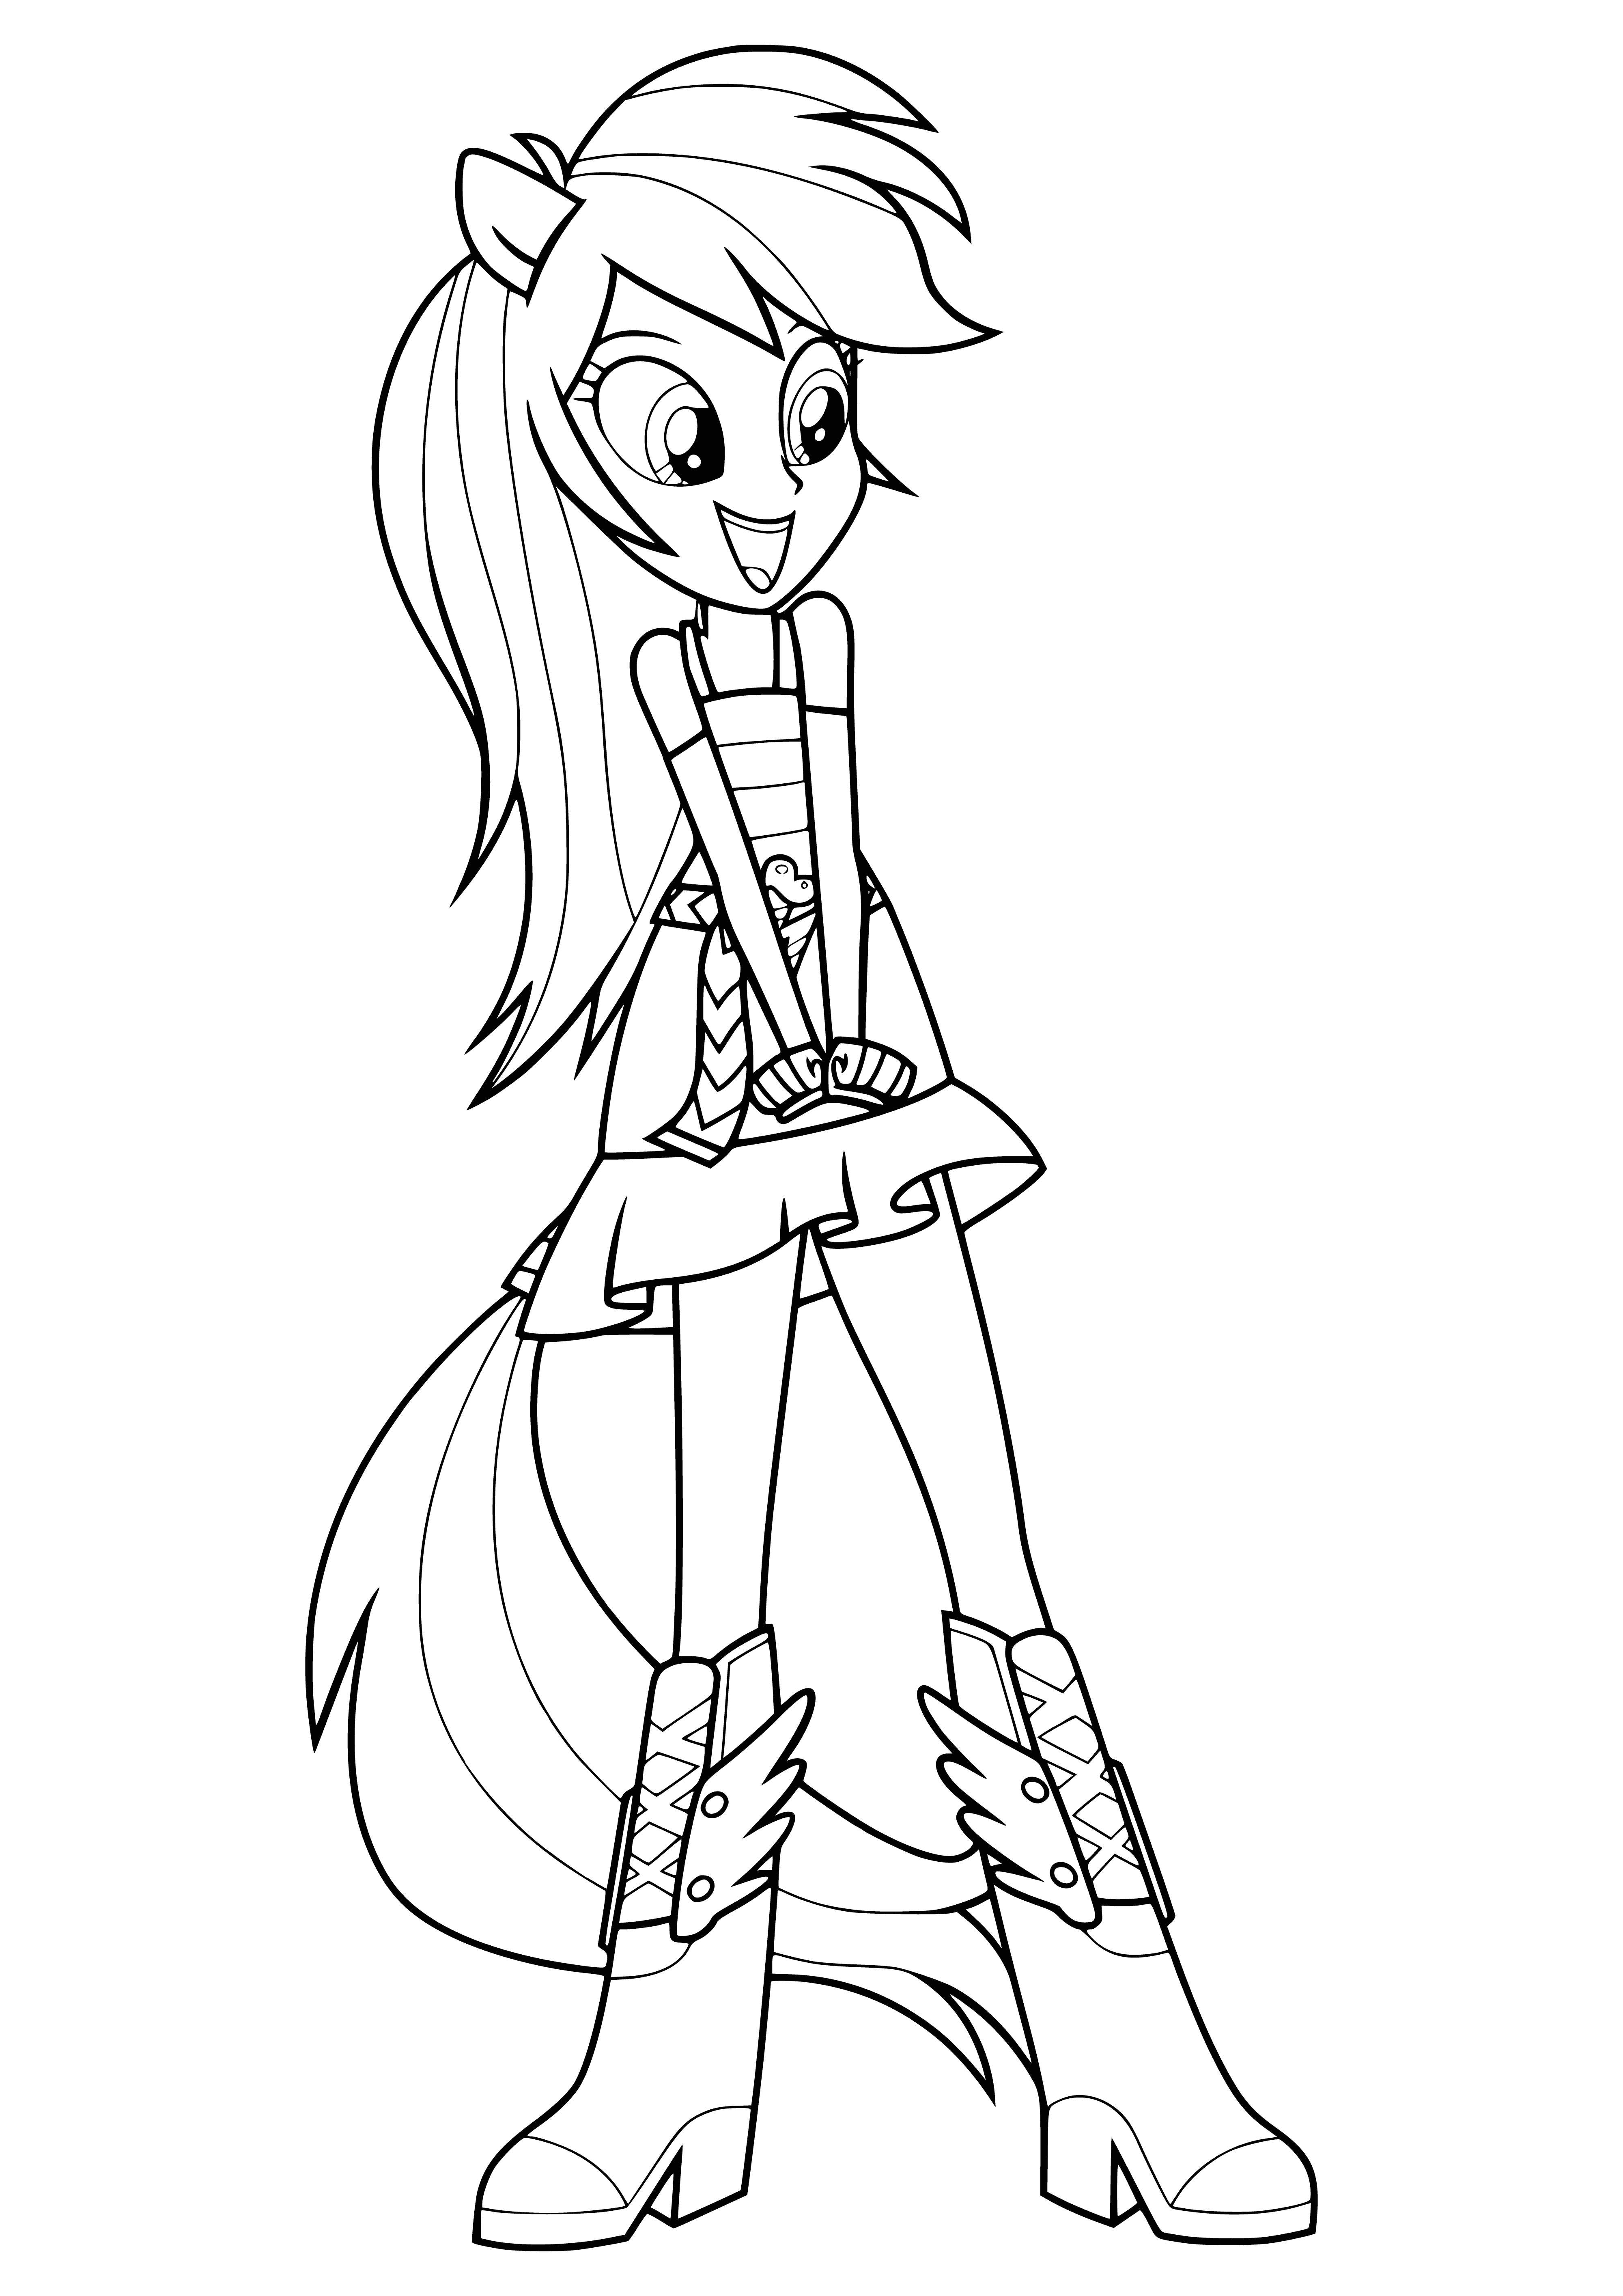 coloring page: Rainbow Dash is a teenage girl with blue eyes, medium complexion, slender build, styled & messy blue/white hair, sleeveless shirt, blue jeans, white sneakers & blue/white cap worn backward.